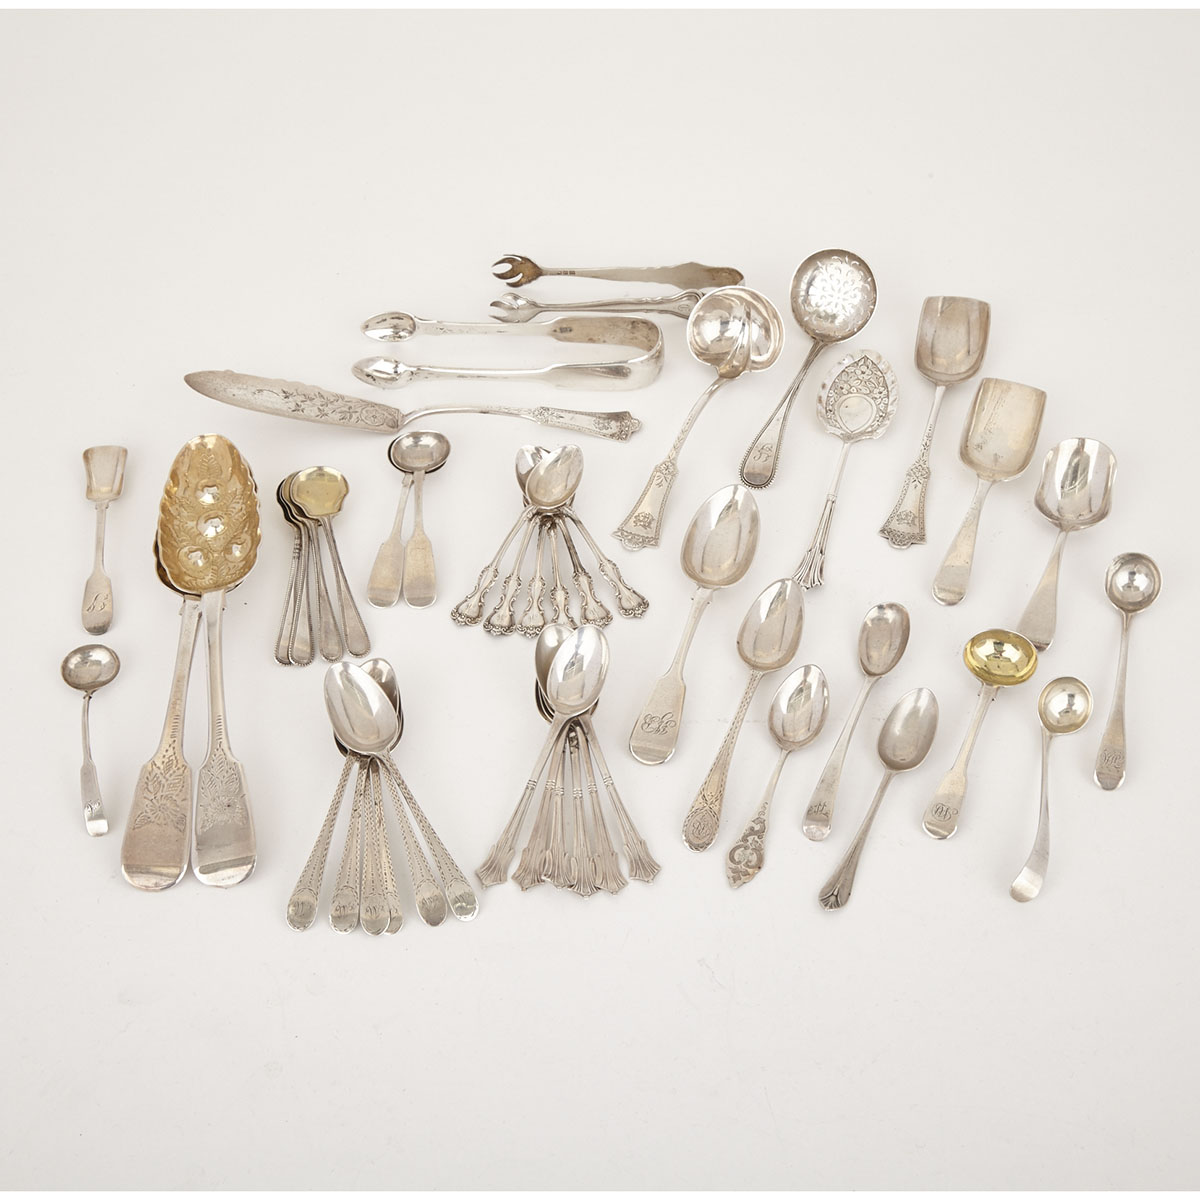 George III and Later Mainly English Silver Flatware, late 18th/19th/early 20th century